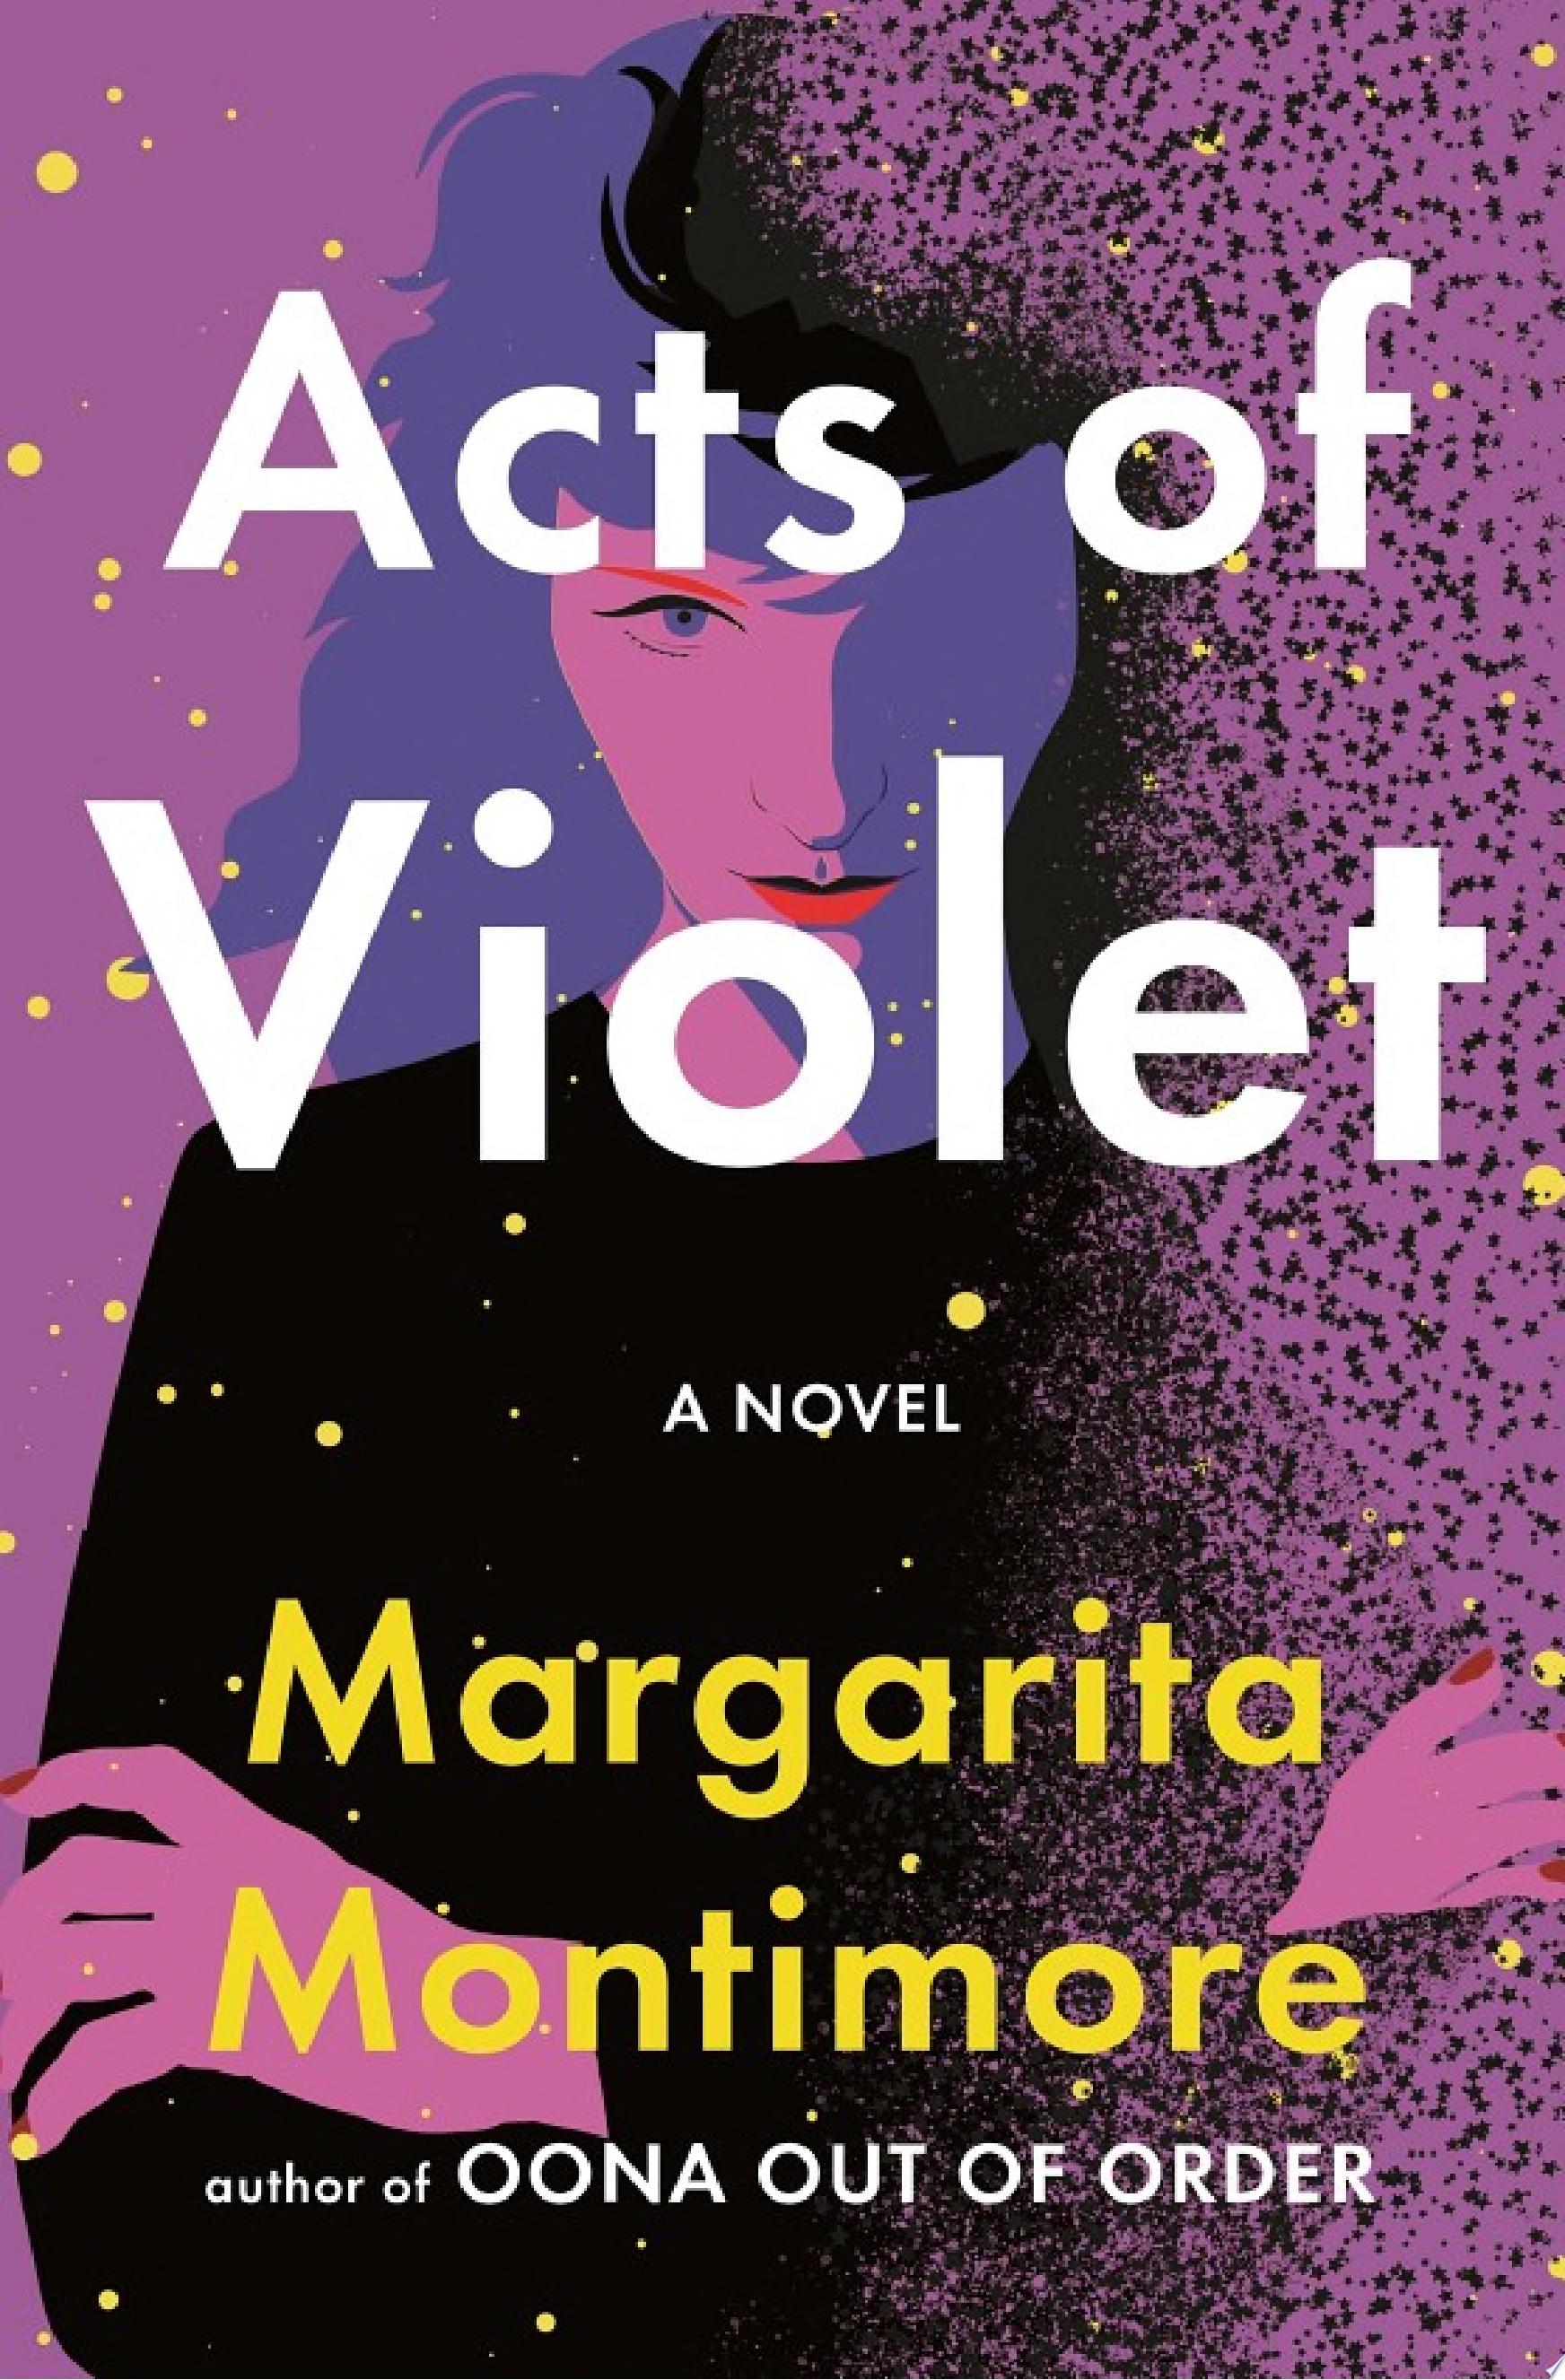 Image for "Acts of Violet"